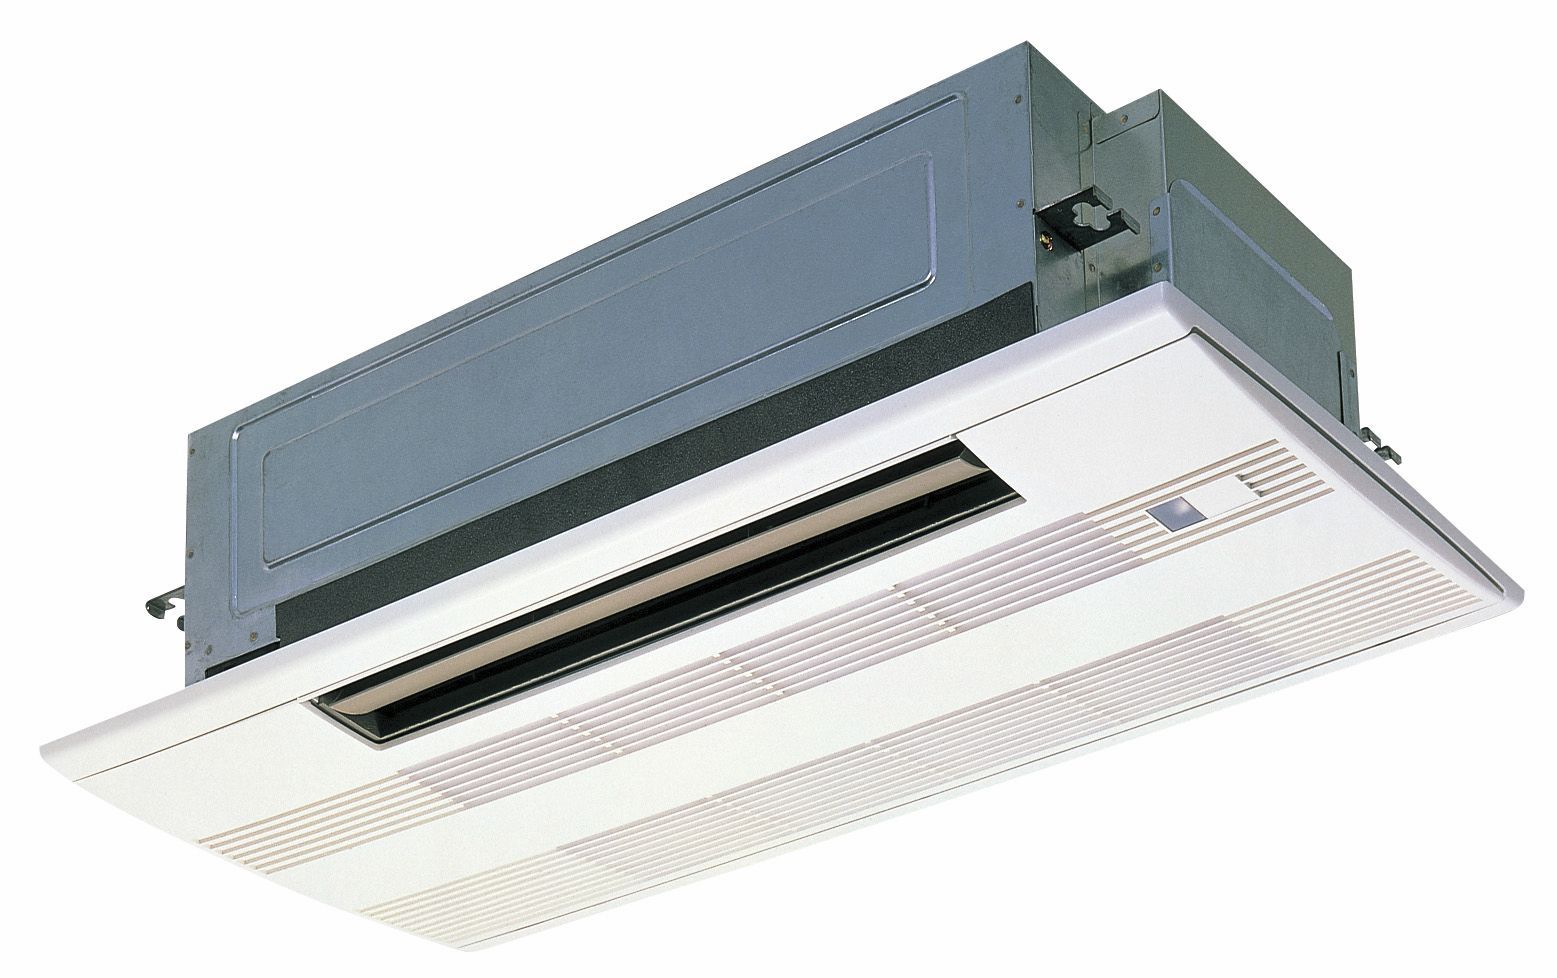 Healthcare facility air conditioner / cassette 1.8 kW | PMFY Mitsubishi Electric Cooling & Heating